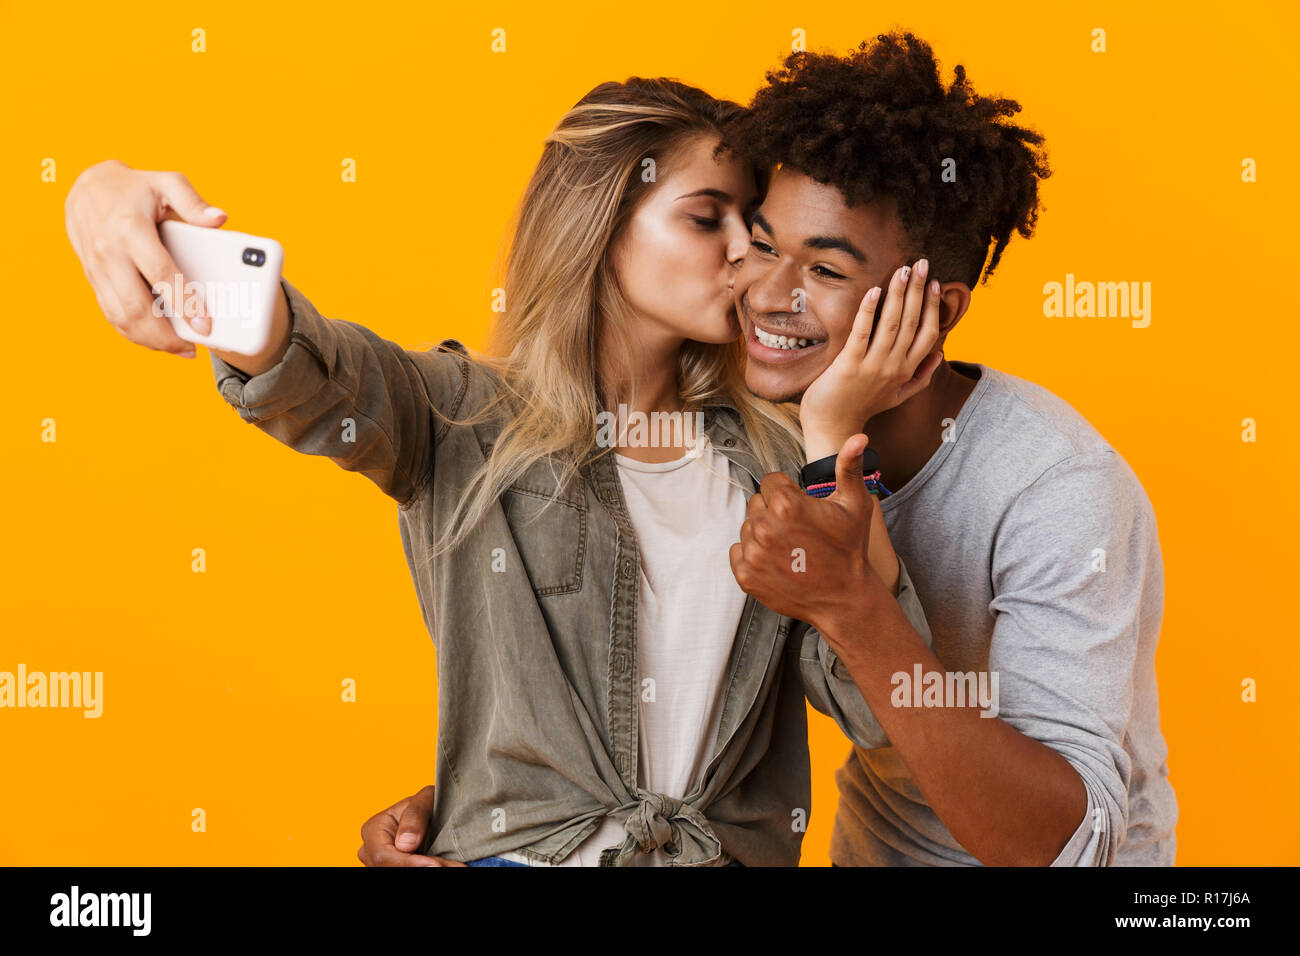 Image Of Happy Cute Young Loving Couple Posing Isolated Over